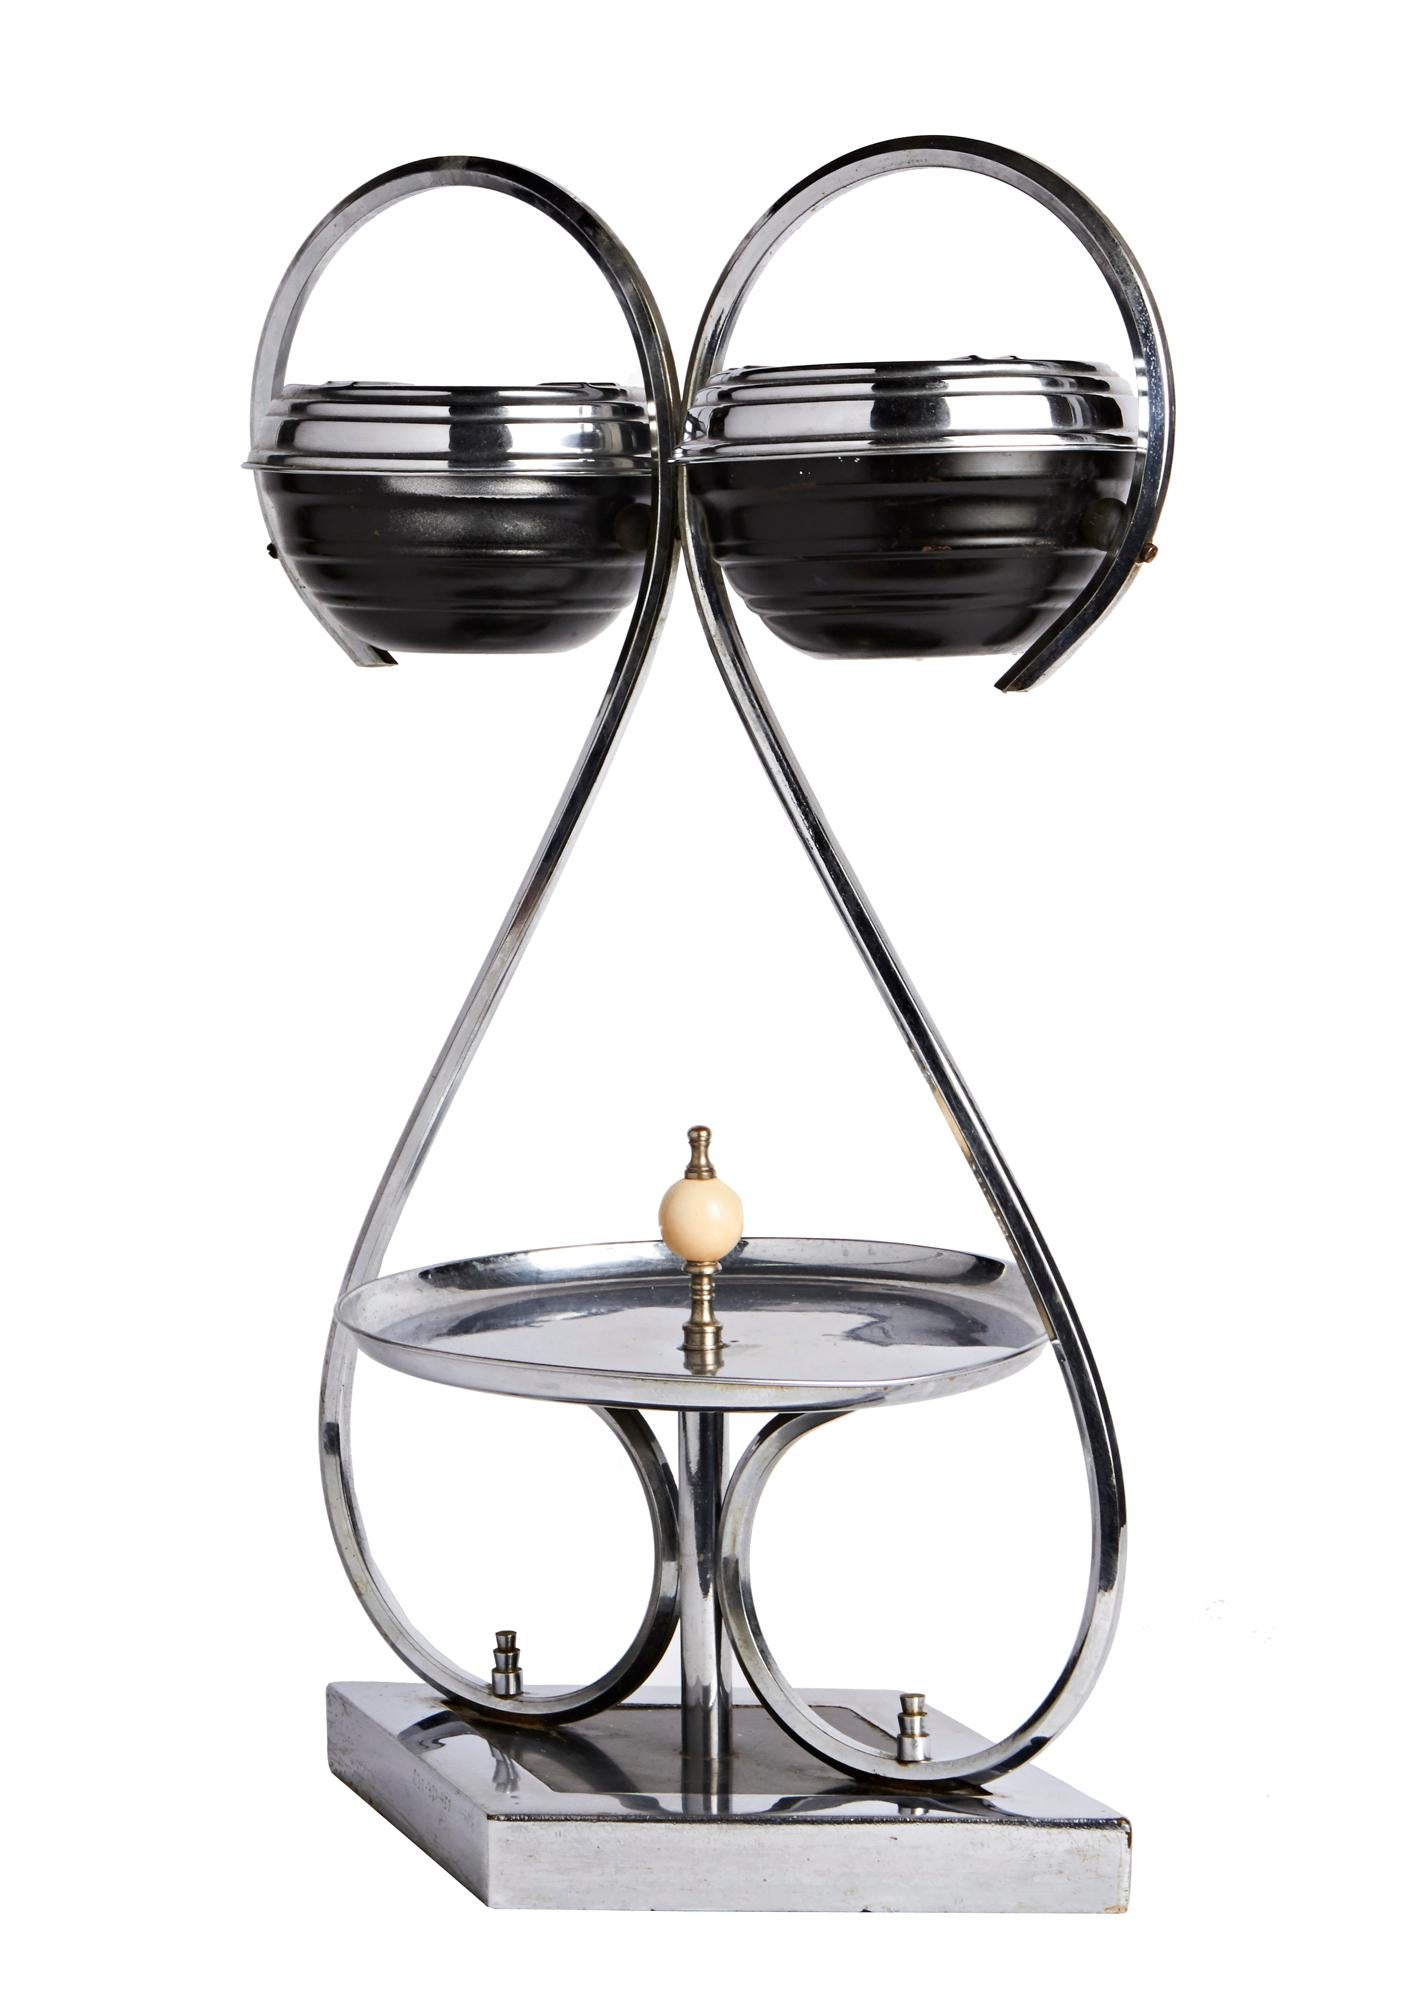 This rare and amazing Canadian chrome and black smoker's stand features twin ashtrays supported by chrome 